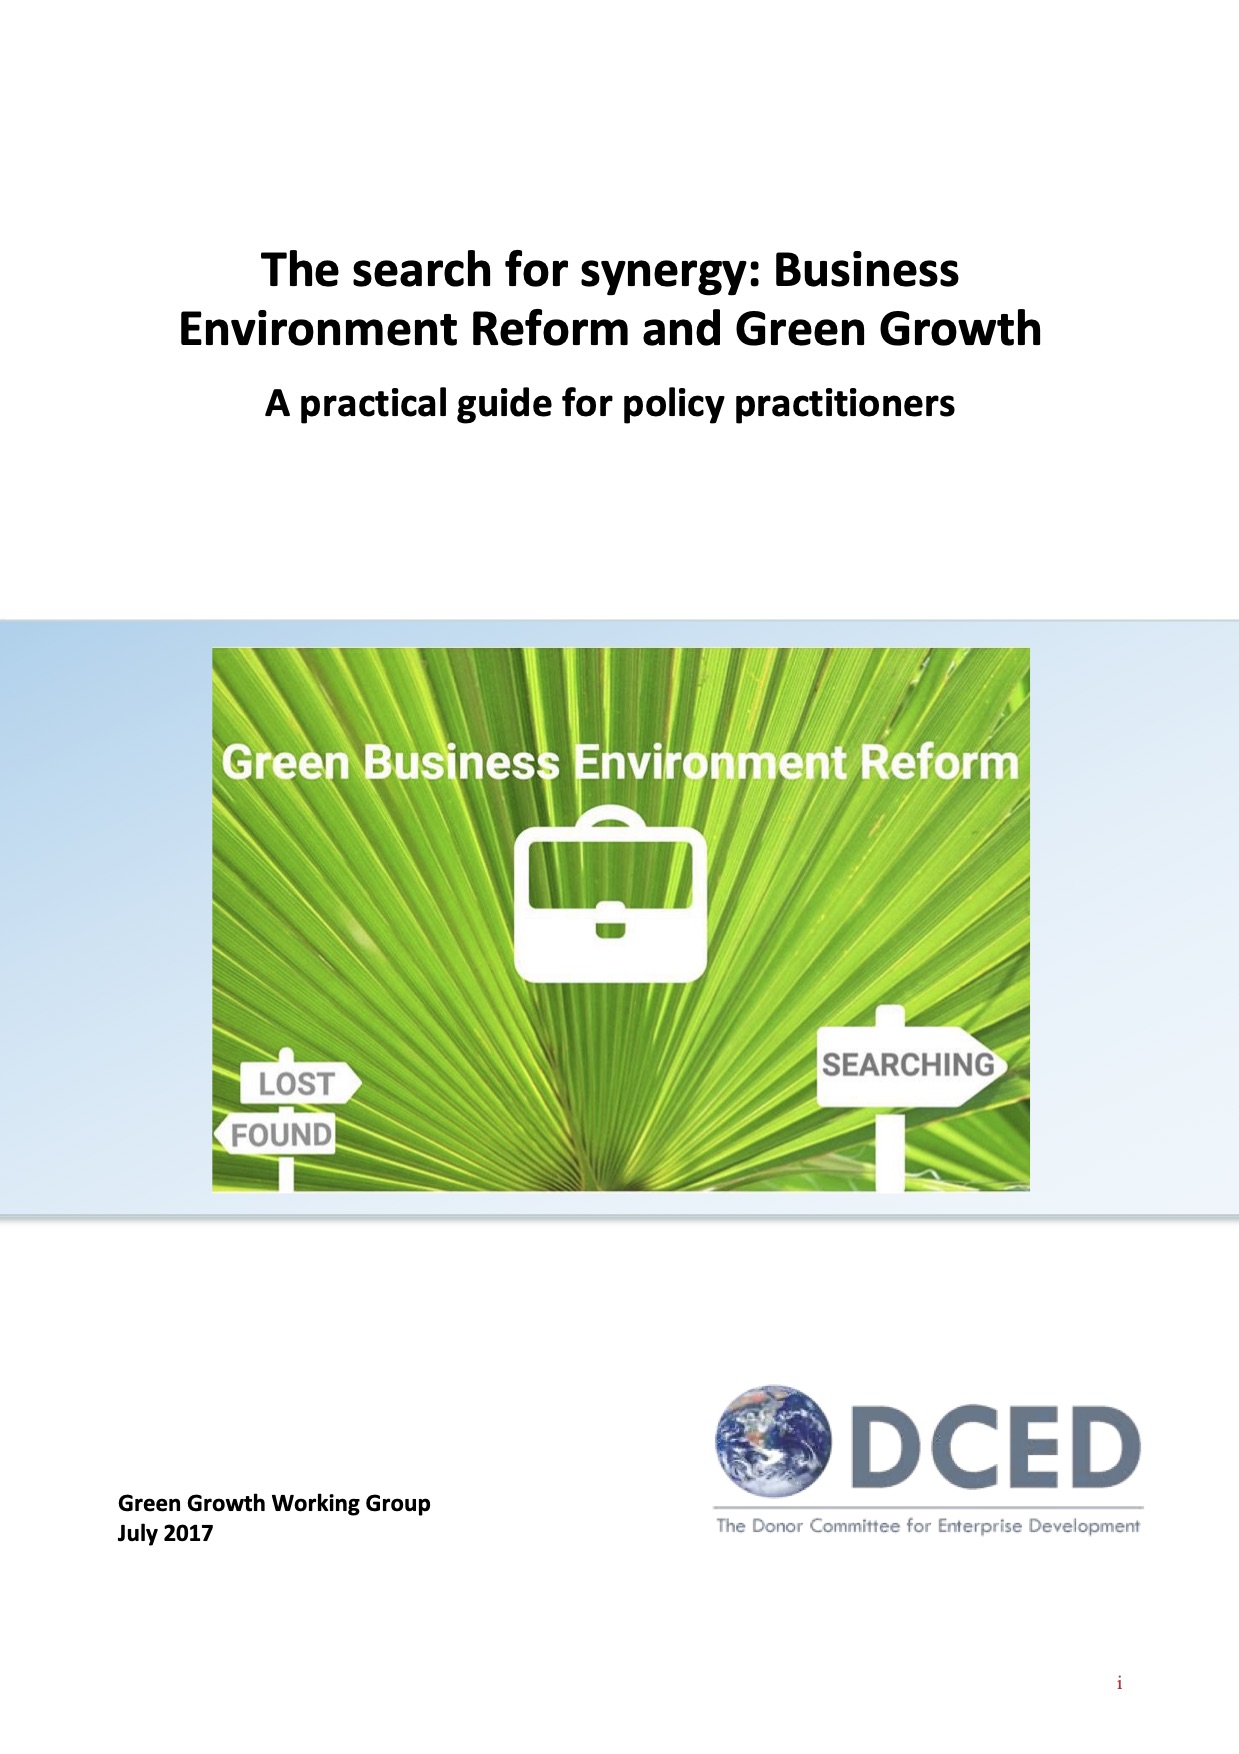 The search for synergy: Business Environment Reform and Green Growth: A practical guide for policy practitioners